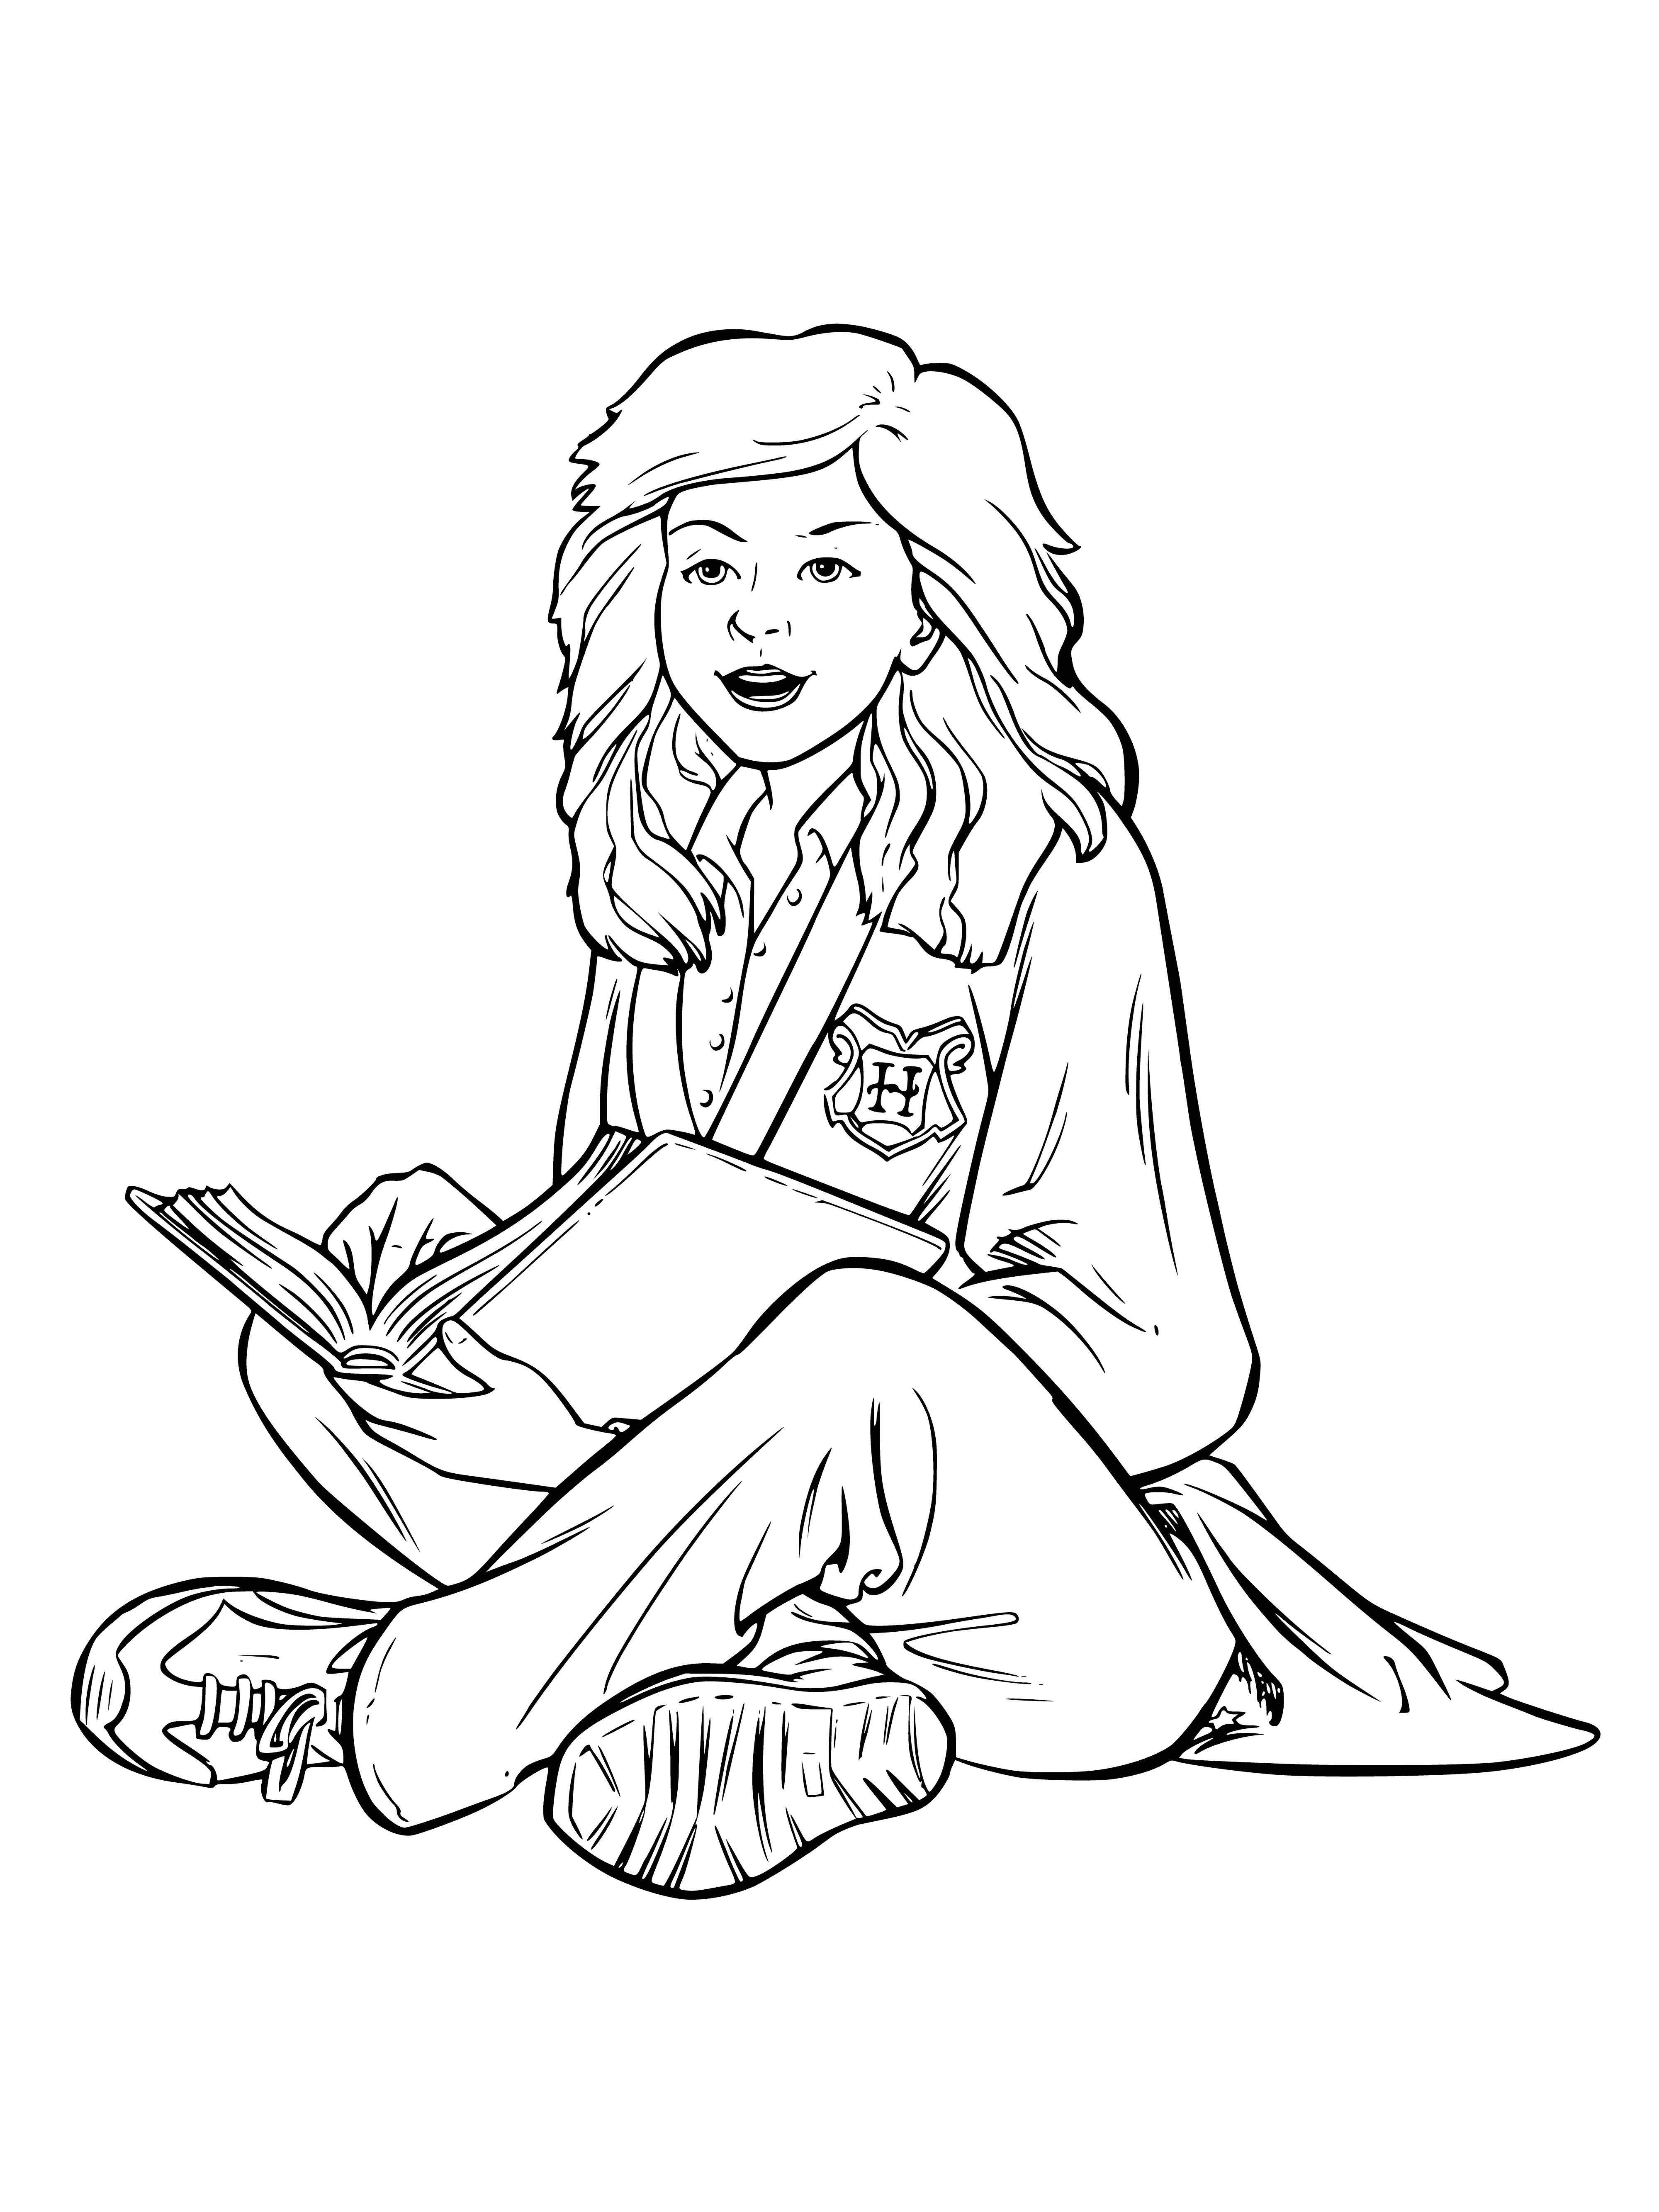 Hermione with a book coloring page